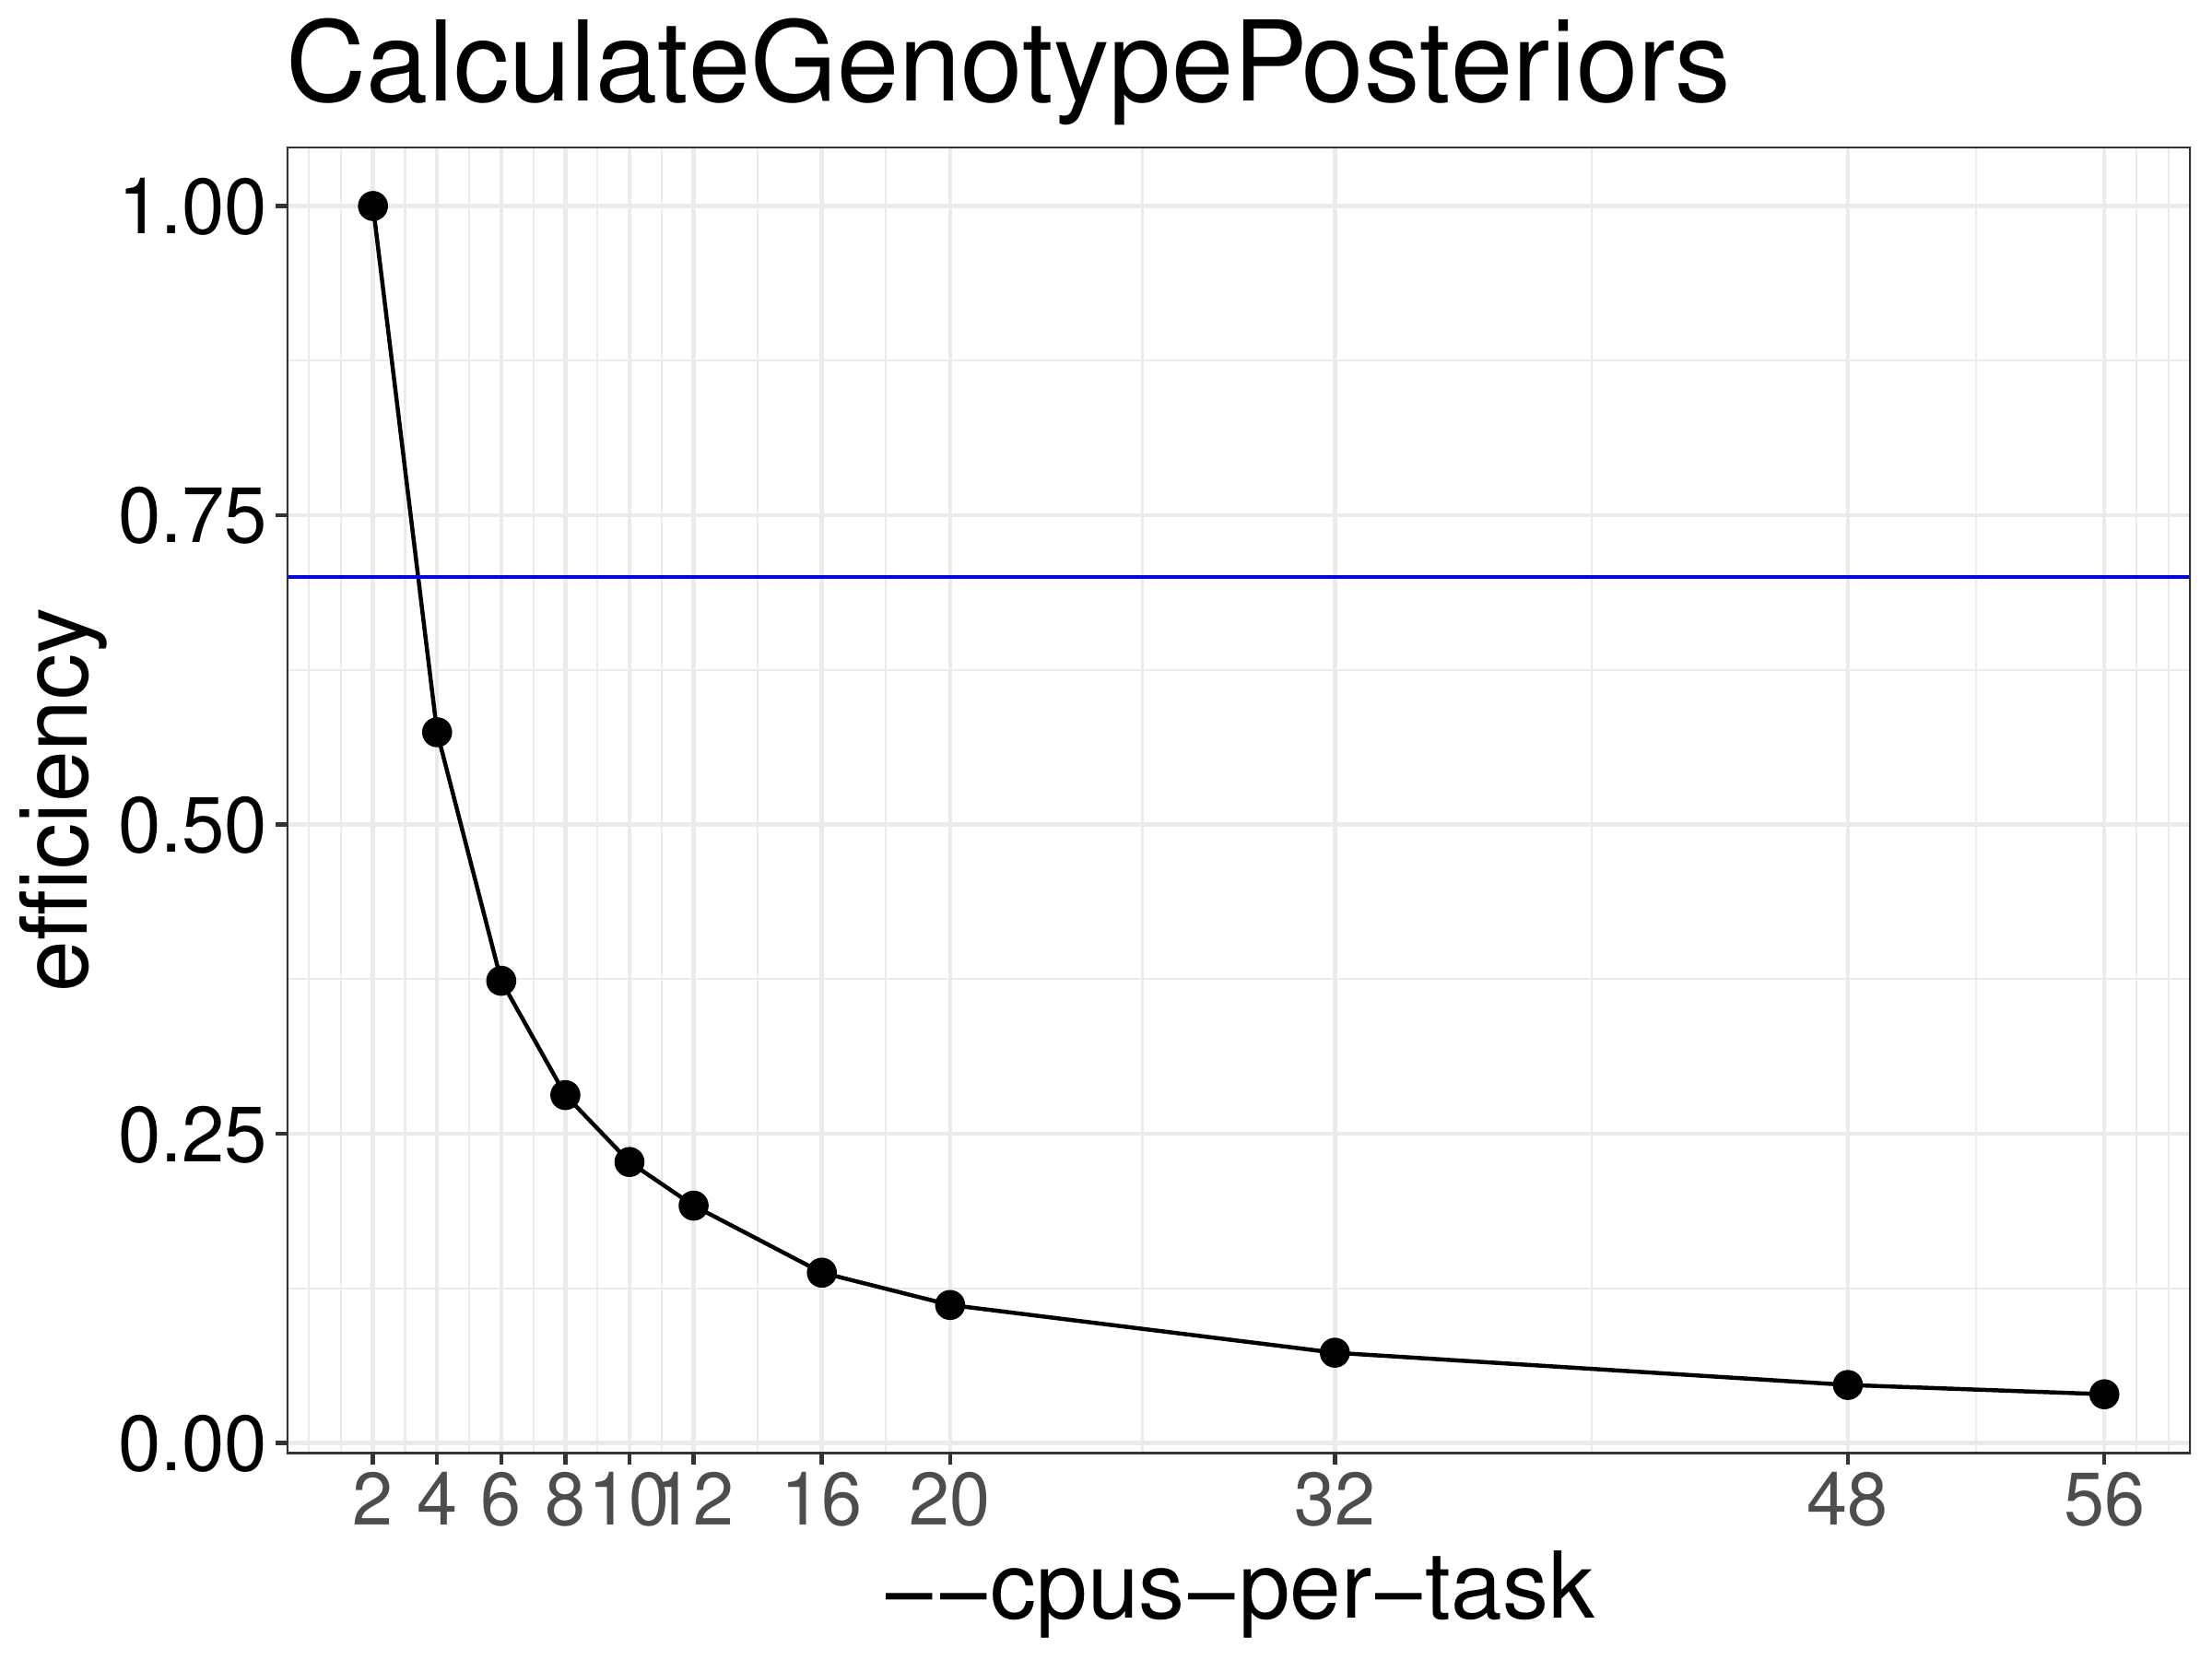 Efficiency of CalculateGenotypePosteriors as a function of the number of threads